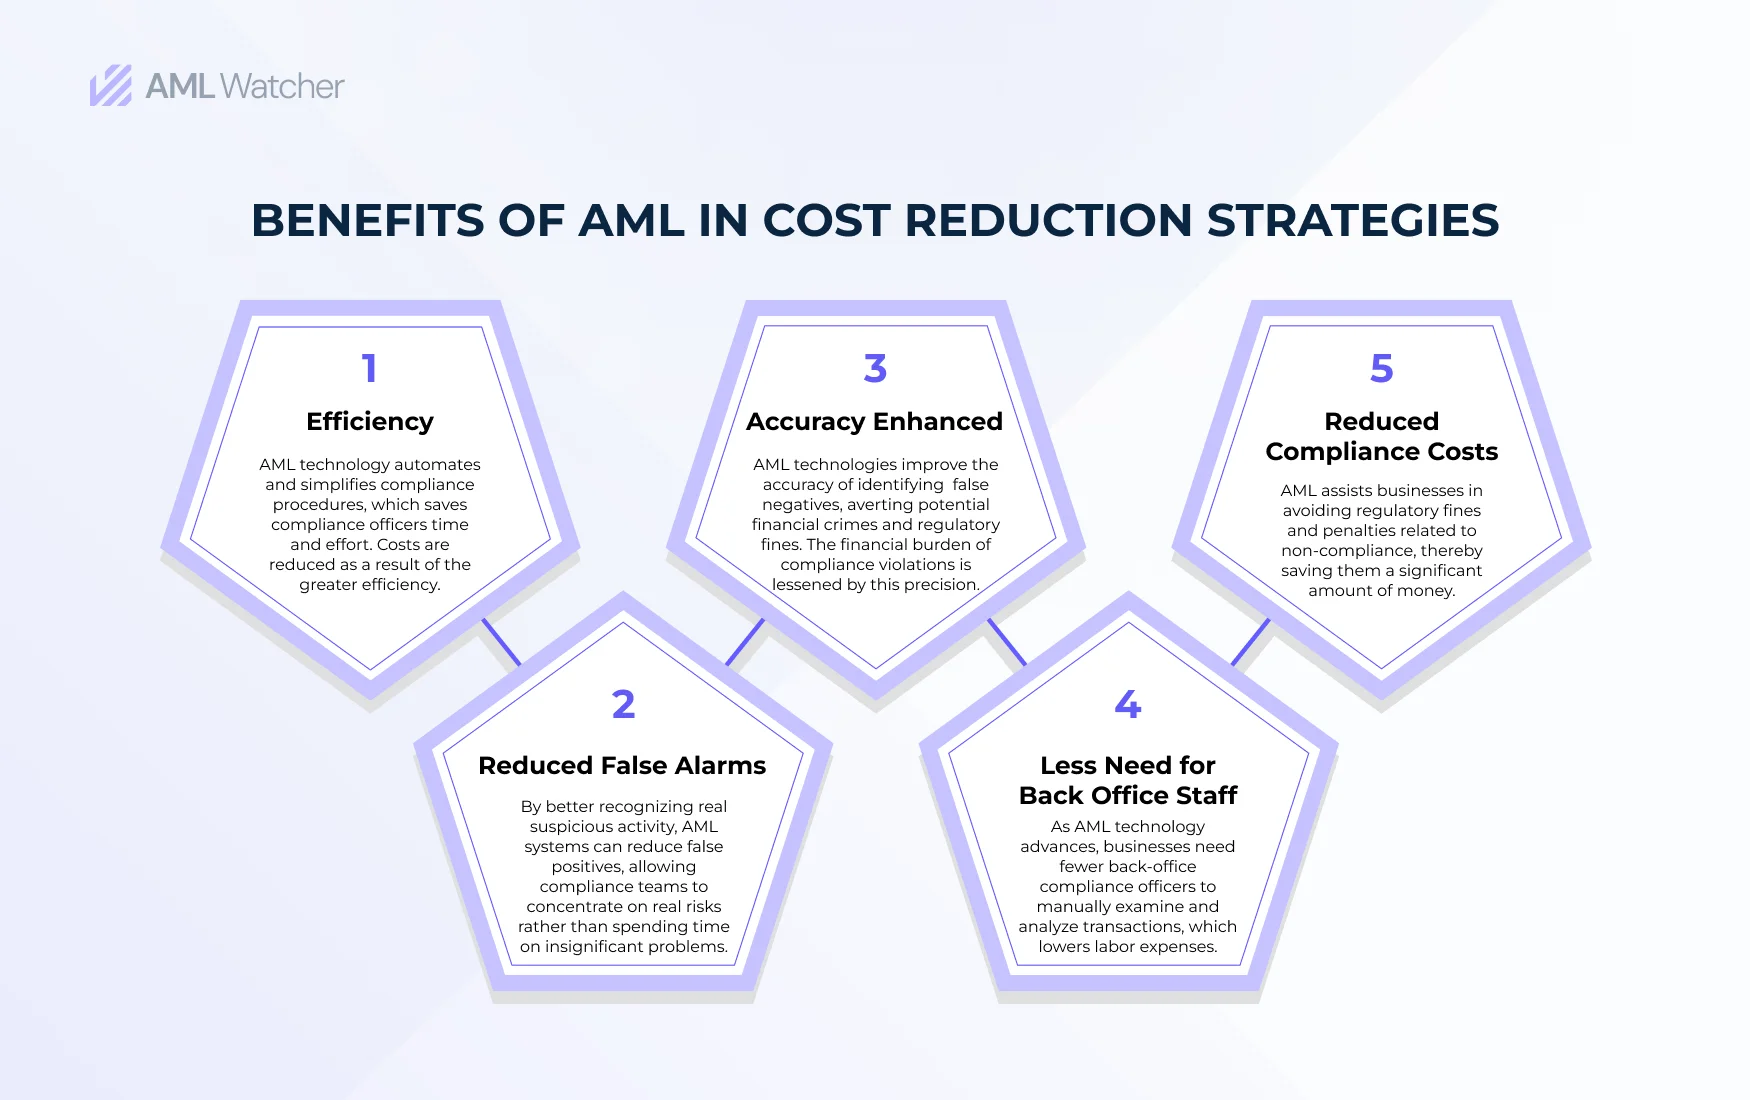 Image illustrating 5 Benefits of AML in Cost Reduction Strategies